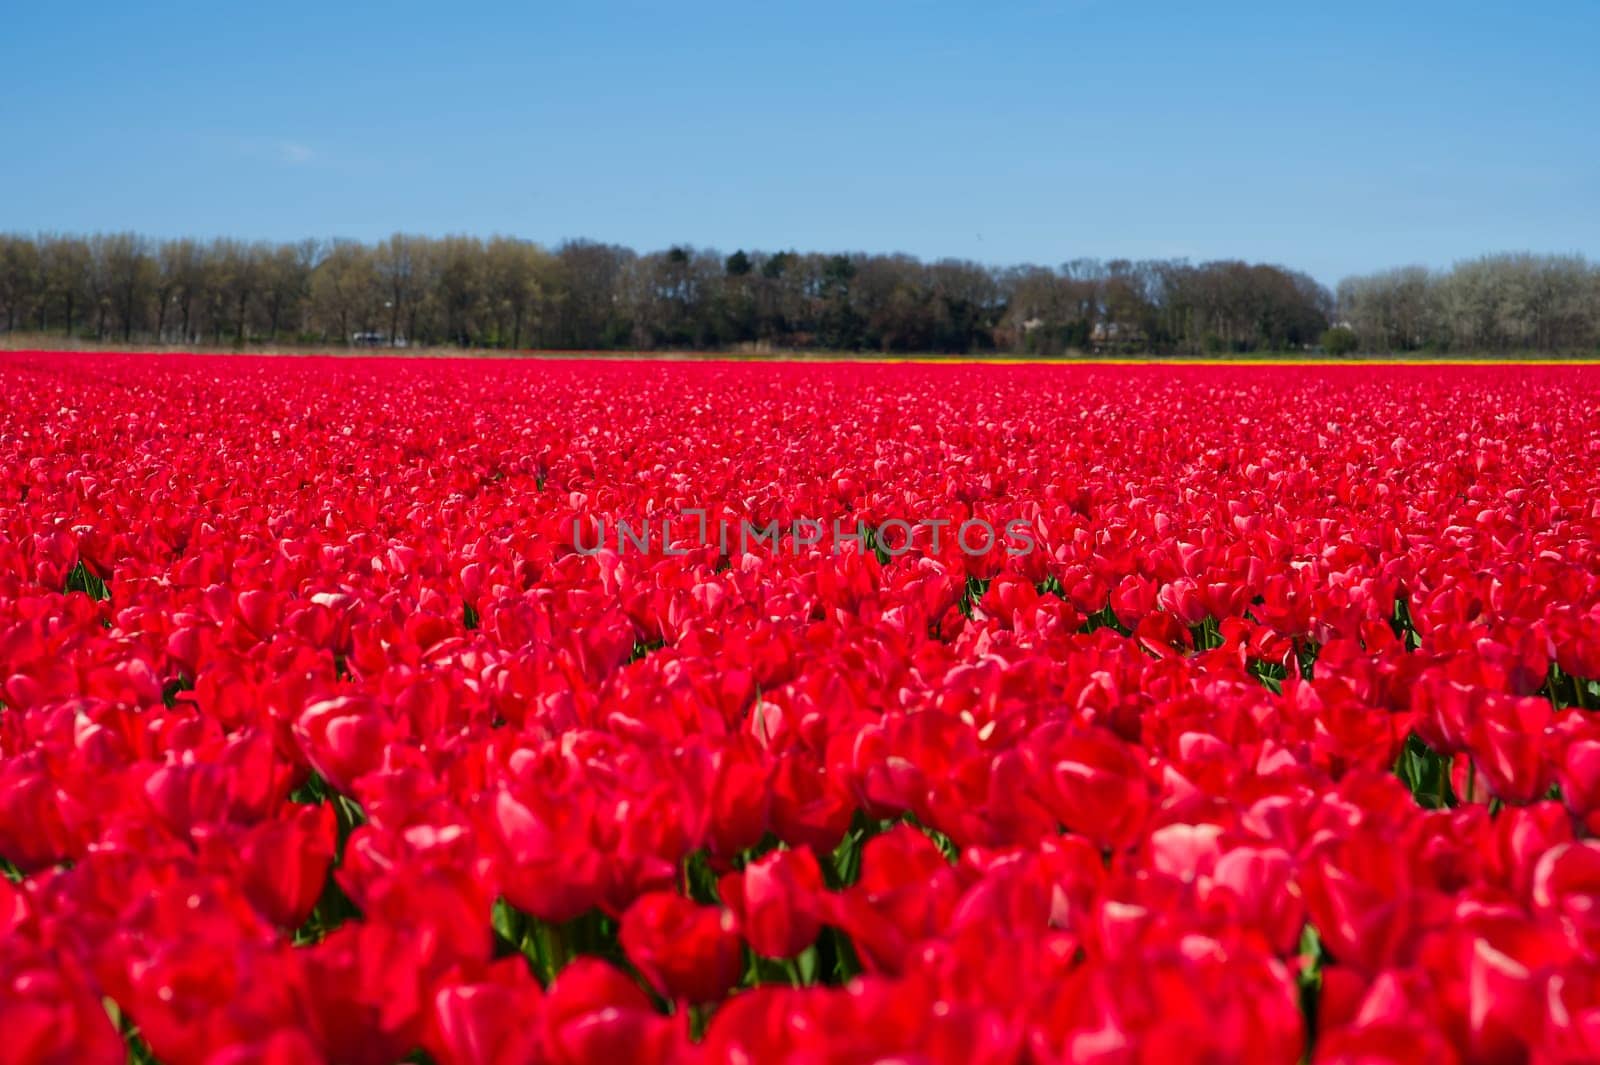 Red tulips blooming in vast springtime field. Beautiful bright red tulip in the middle of a field. Blossoming tulip fields in a dutch, Netherlands.